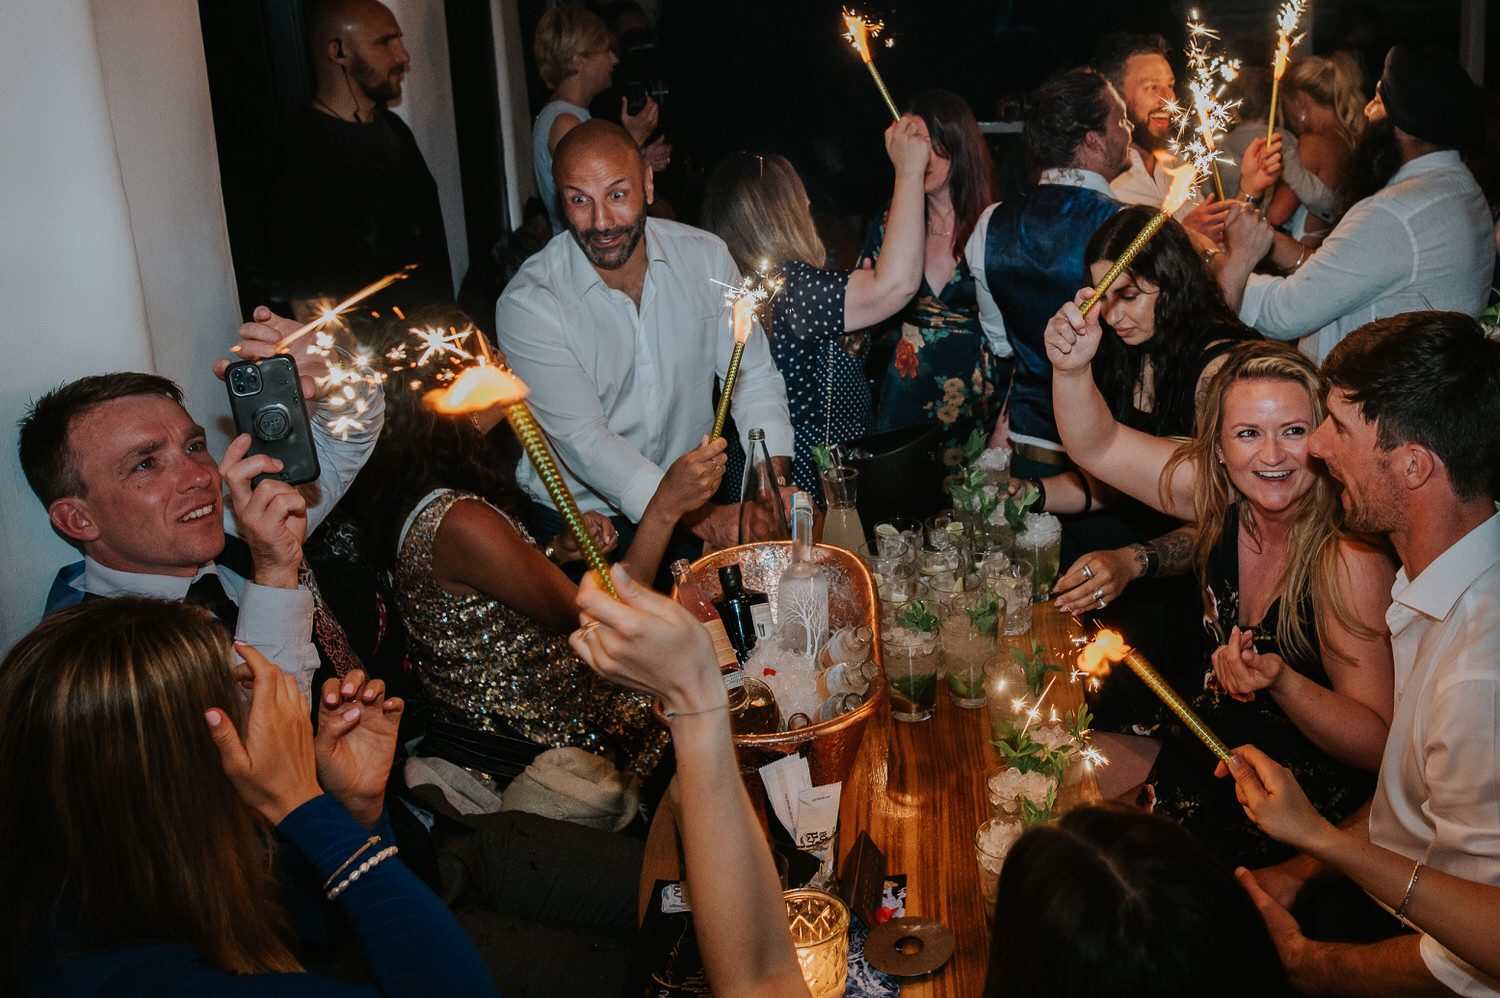 Mykonos wedding photographer: guests all having fun with sparklers at their table at Scarpa bar for Mykonos wedding celebration.